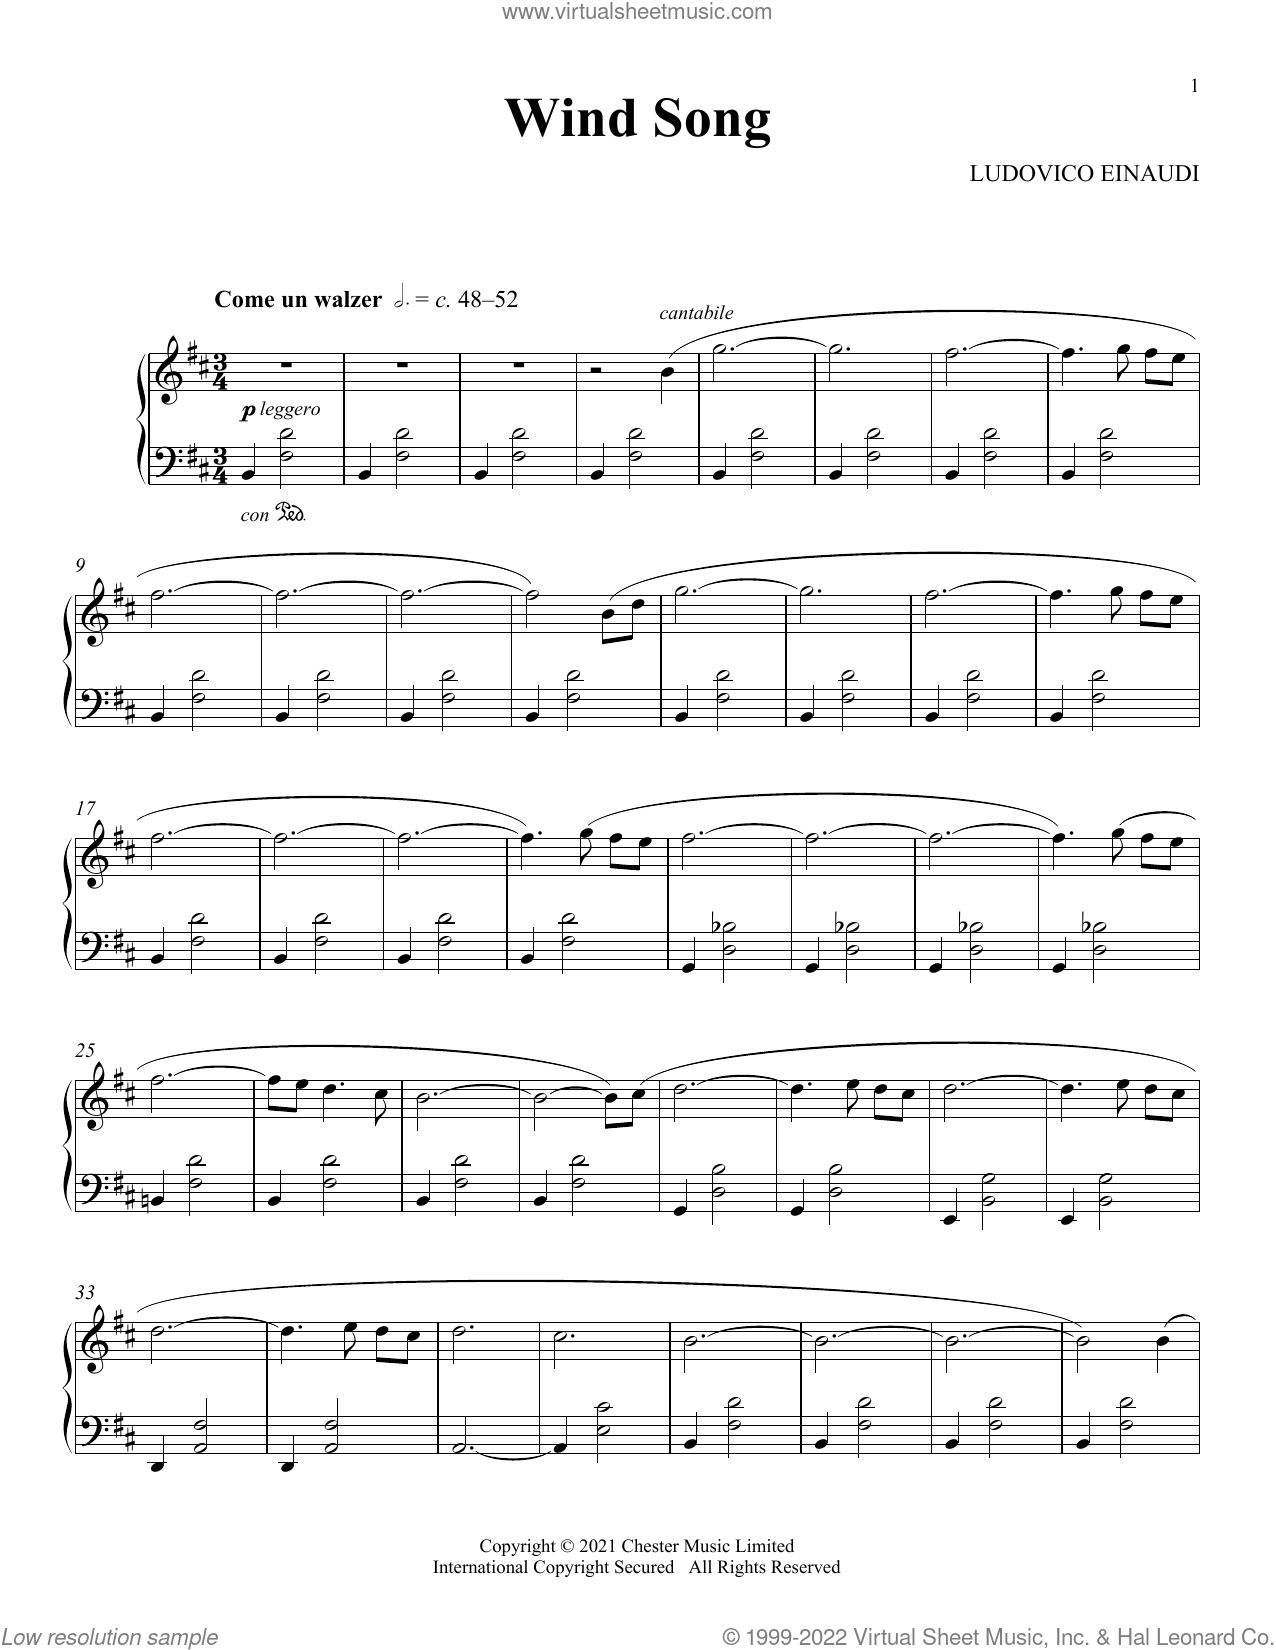 Wind Song sheet music for piano solo (PDF-interactive)